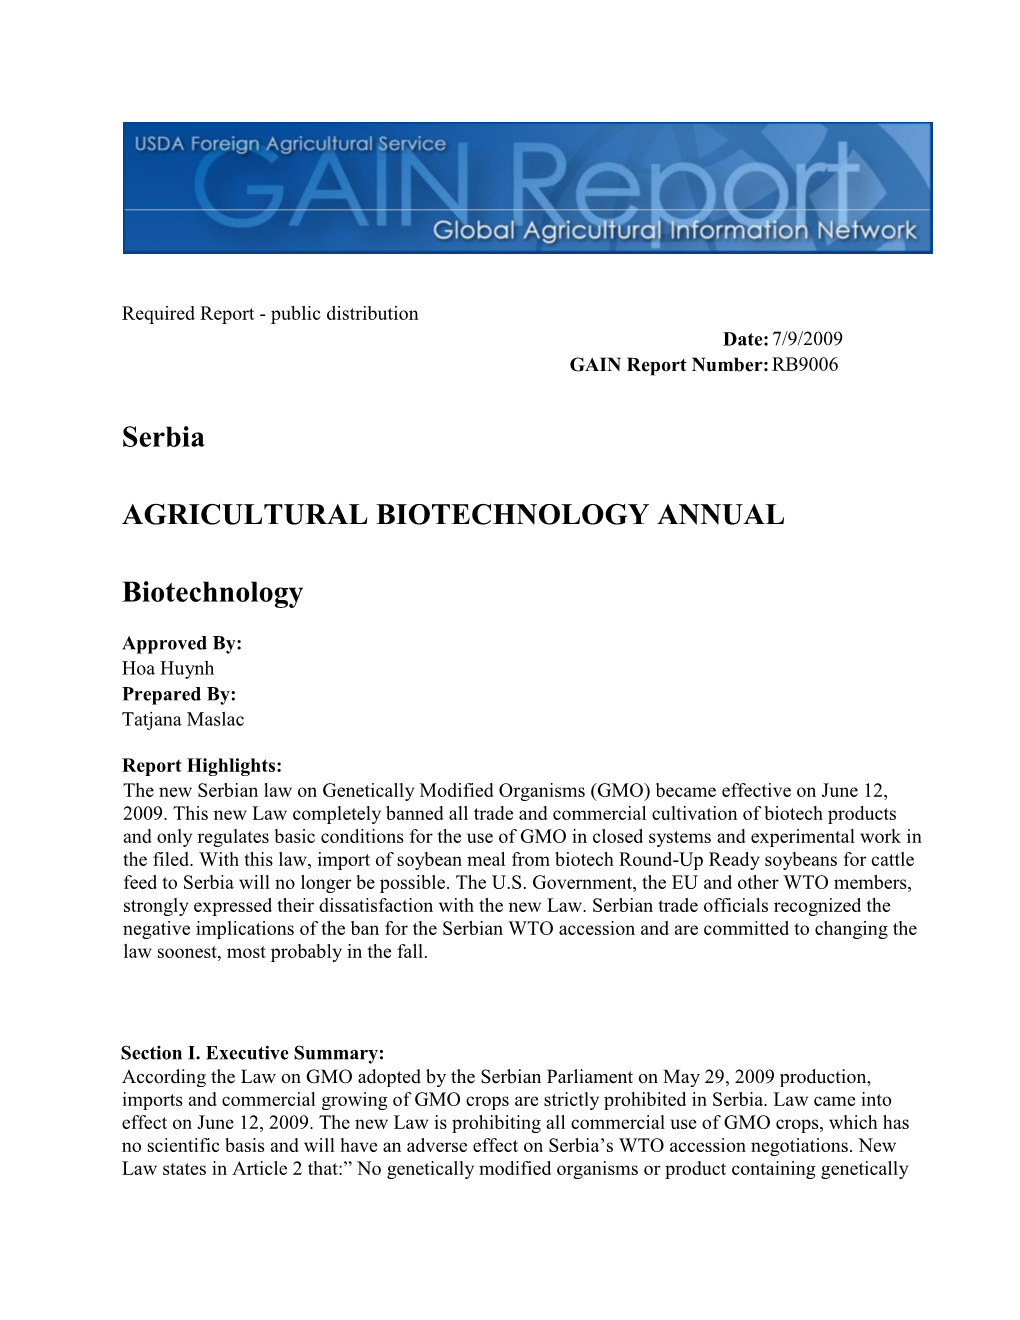 Serbia AGRICULTURAL BIOTECHNOLOGY ANNUAL